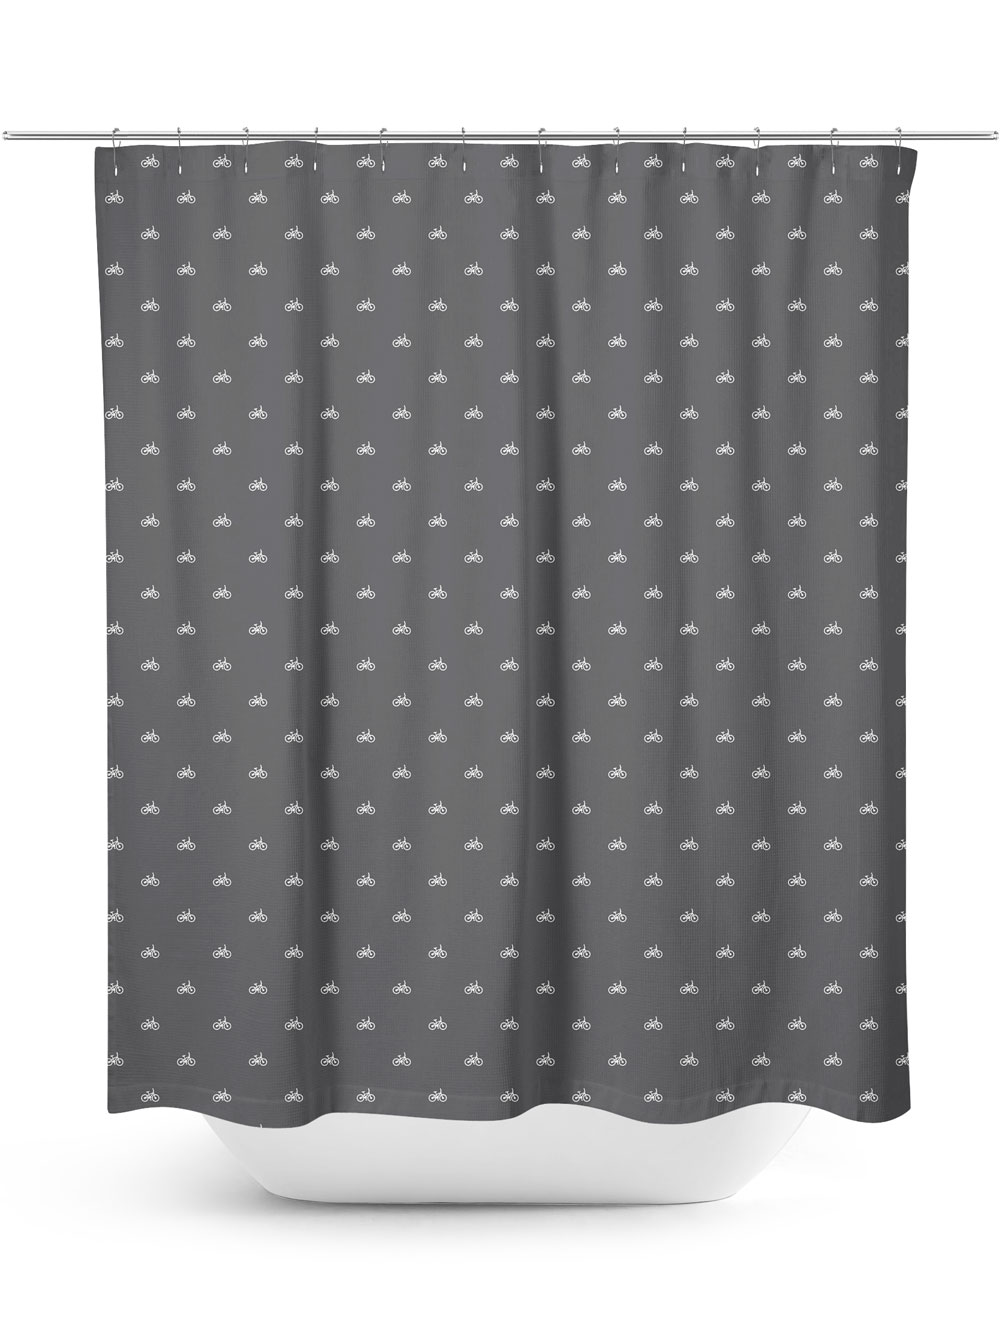 Bicycle symbol icon pattern shower curtain